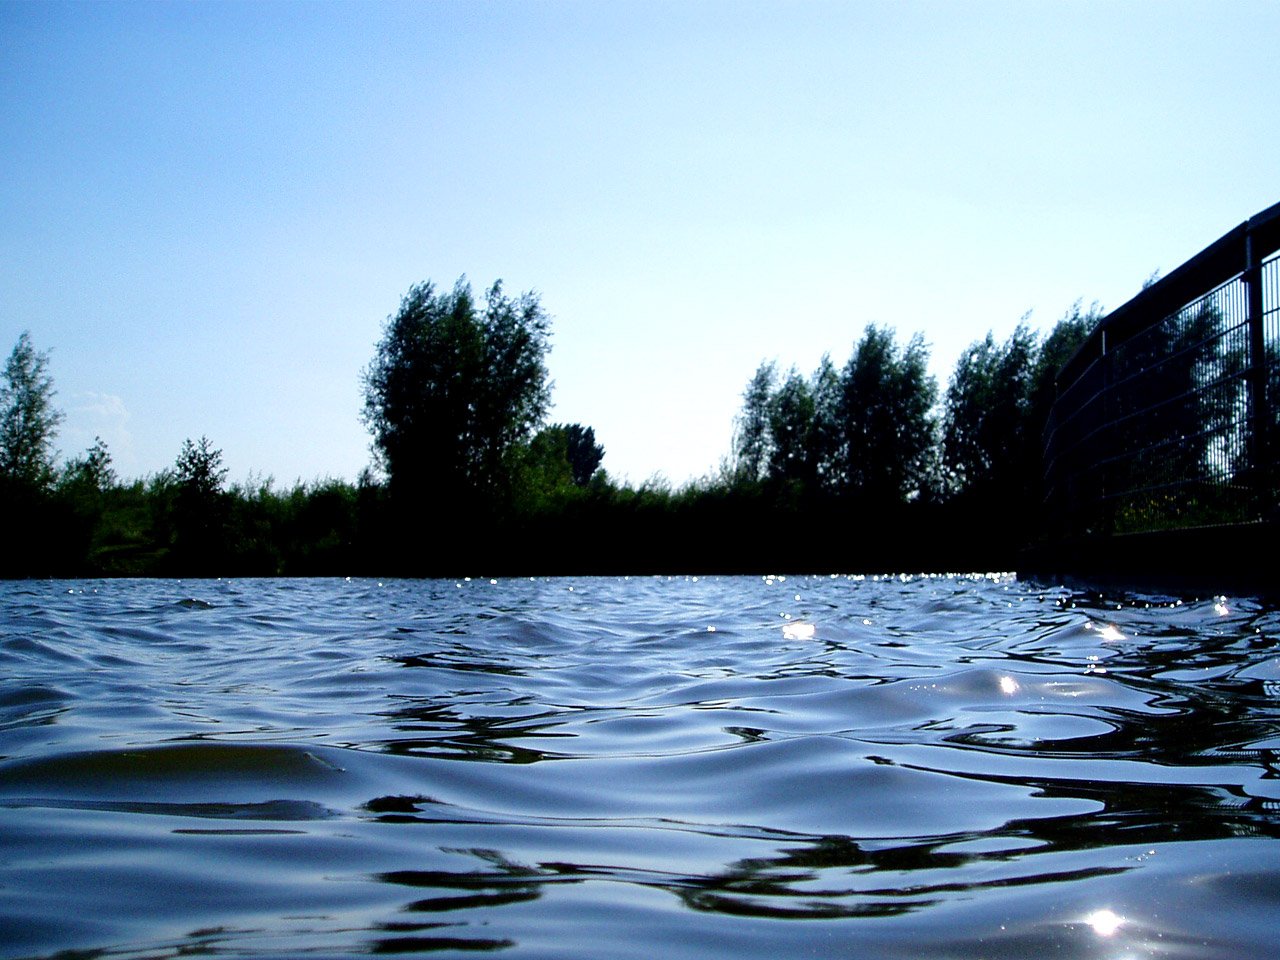 the view of water from a canoe in the lake